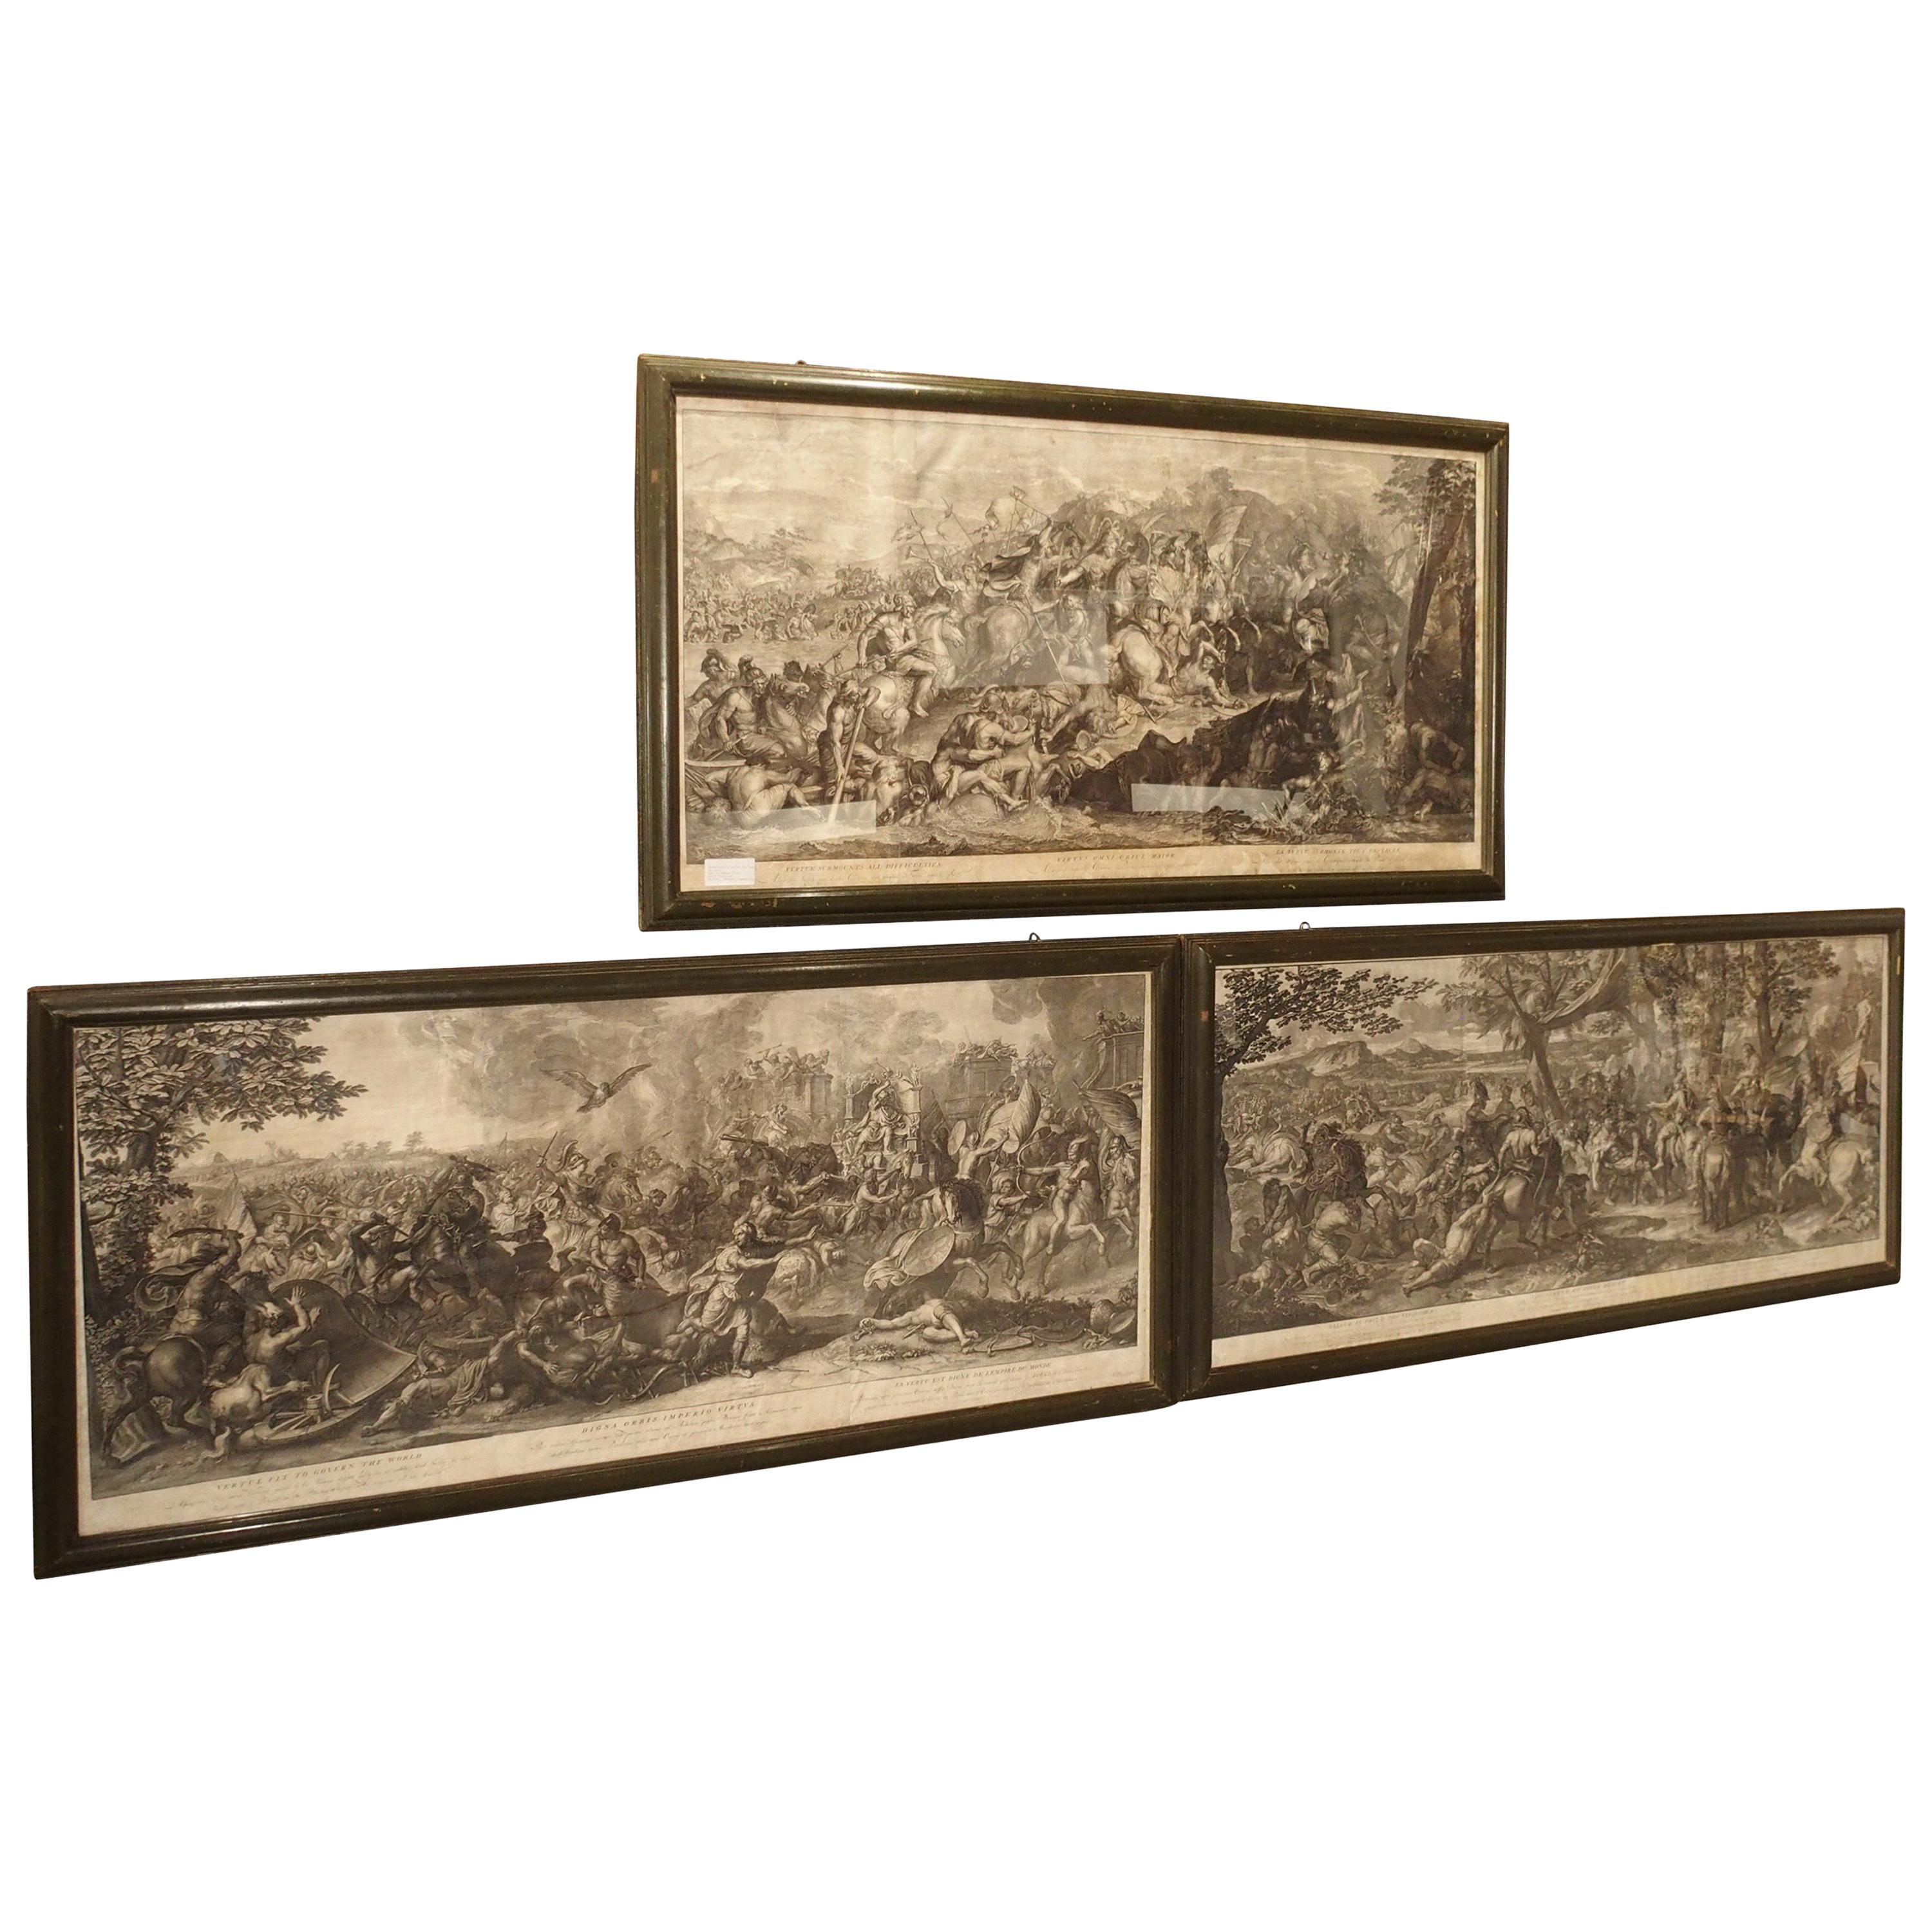 Set of Three 18th Century Engravings The Battles of Alexander the Great